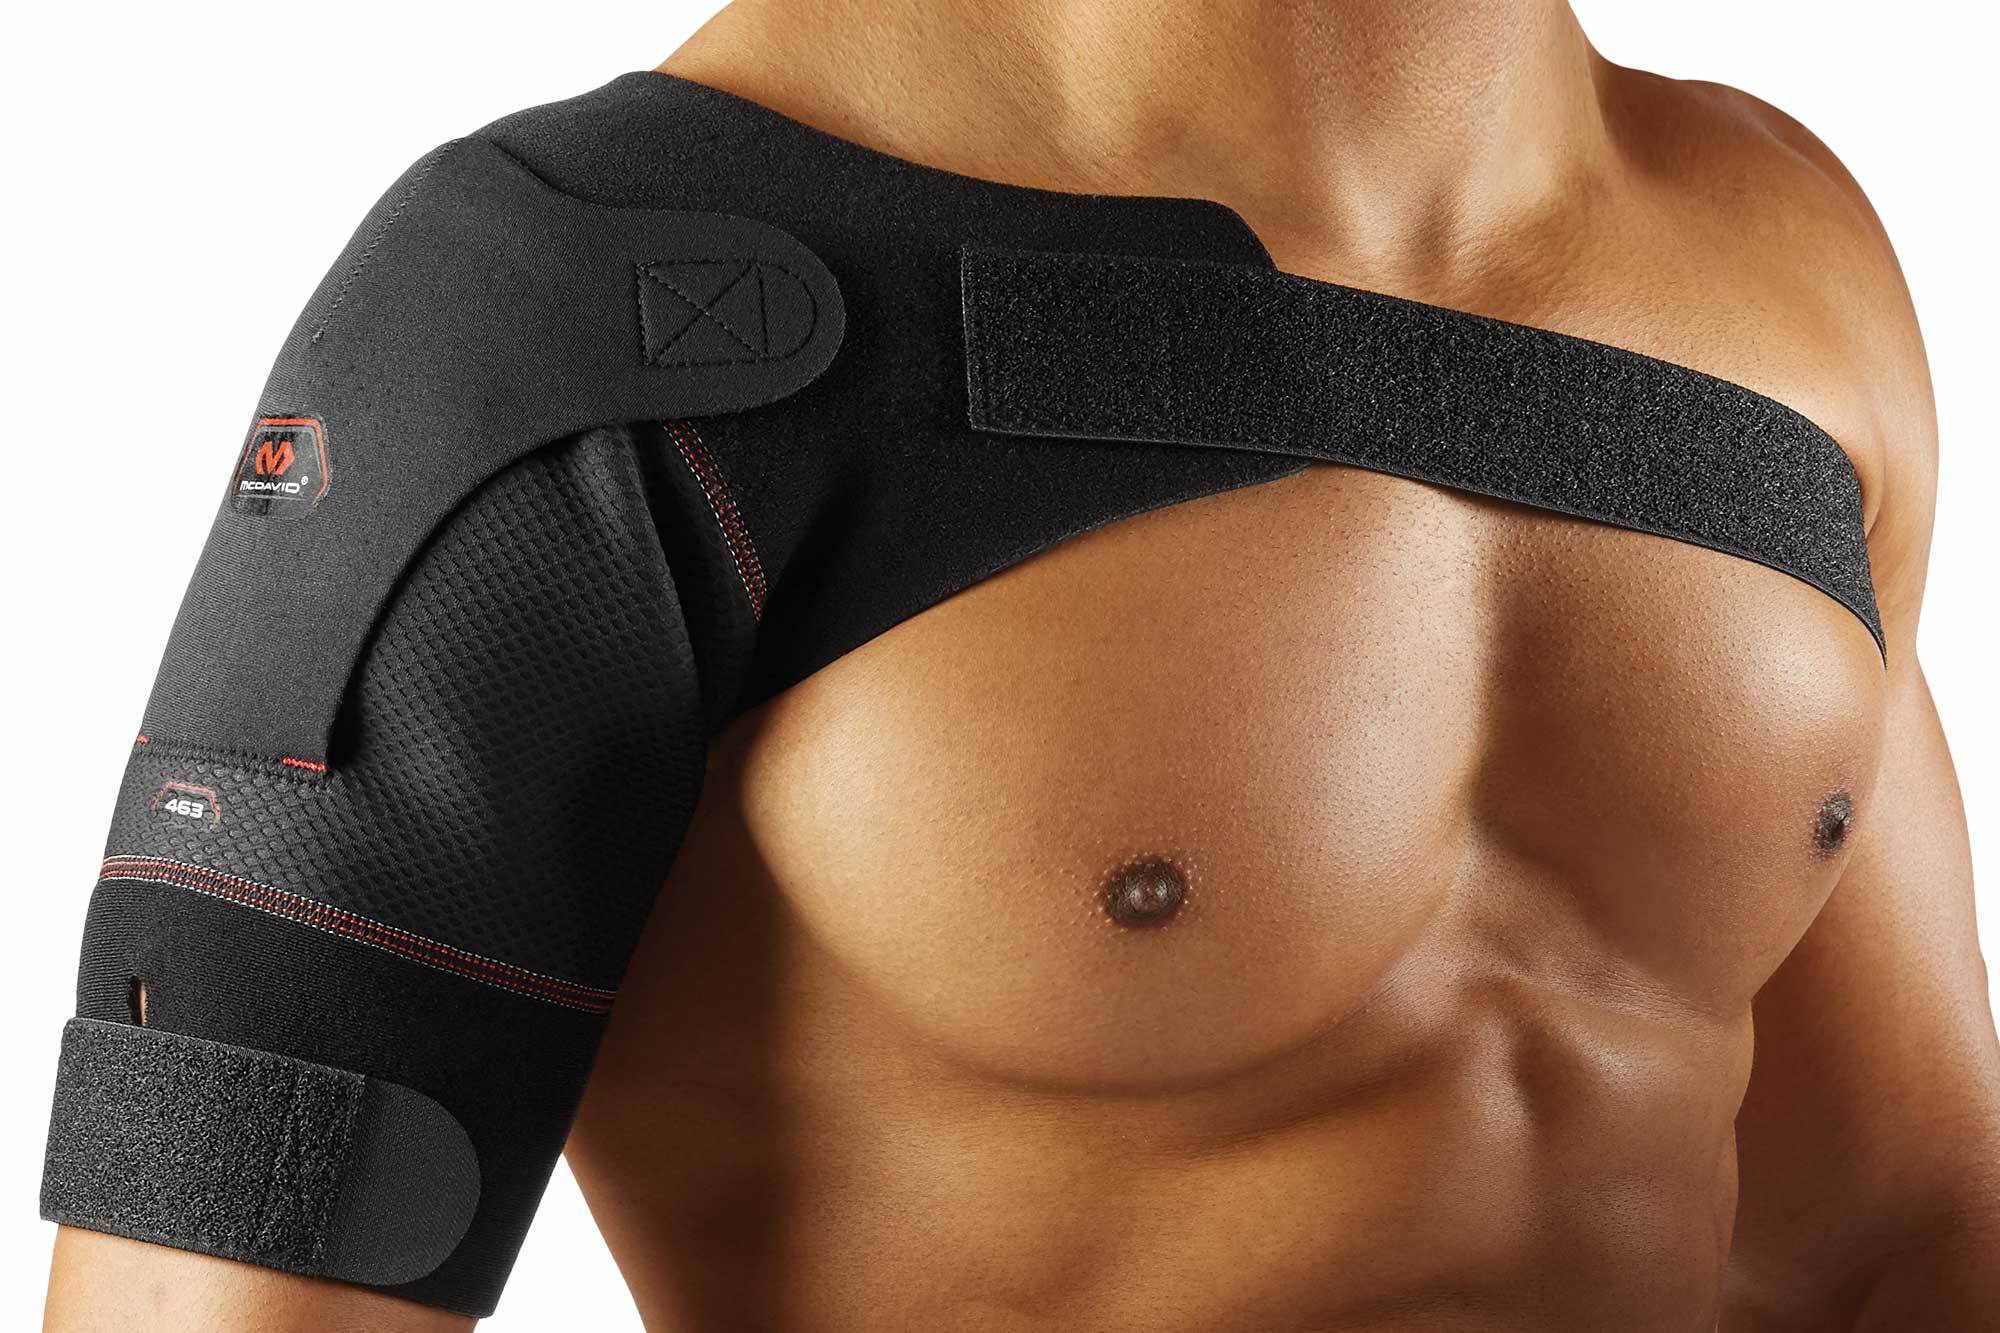 I have torn right labrum in shoulder. Need a brace. should I go for sully  brace or ultimate performance advanced brace? Any recommendations? : r/ wrestling